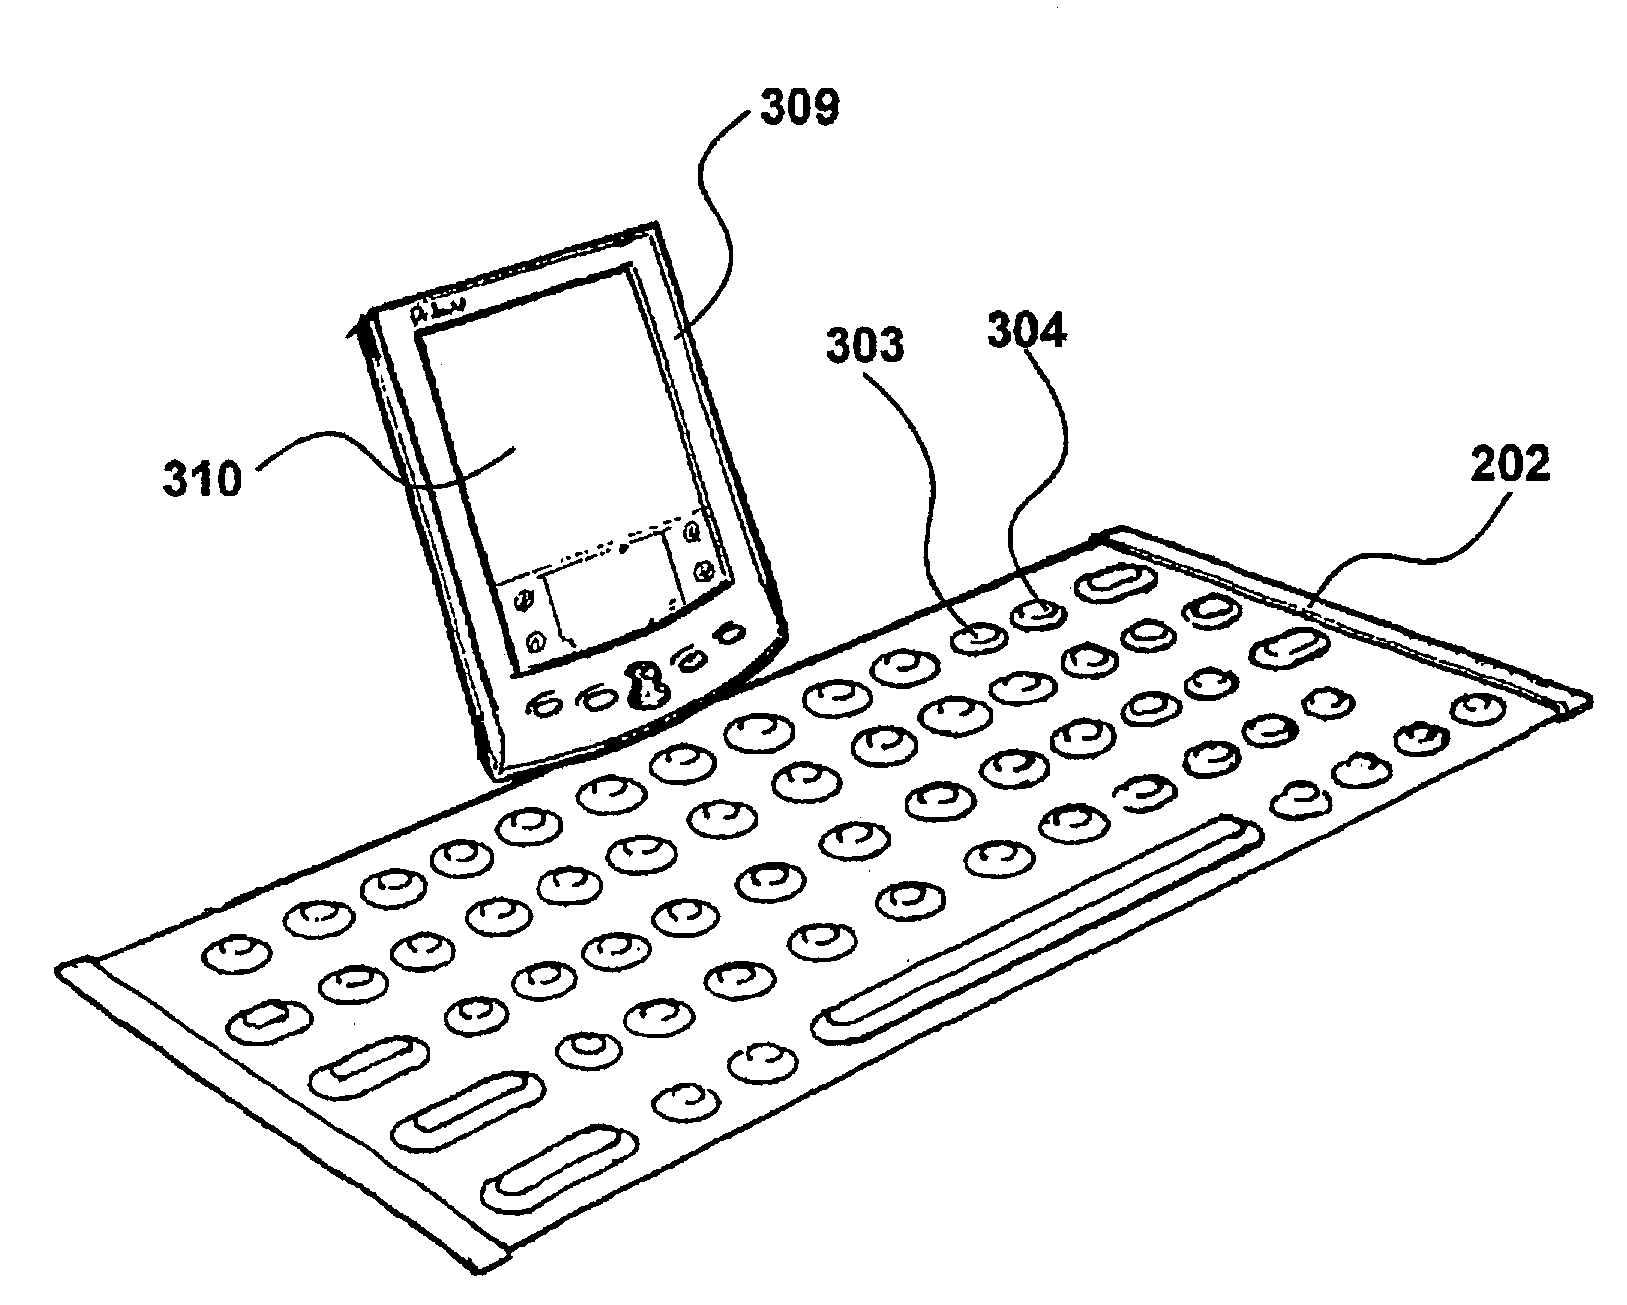 Manual input apparatus for a handheld device